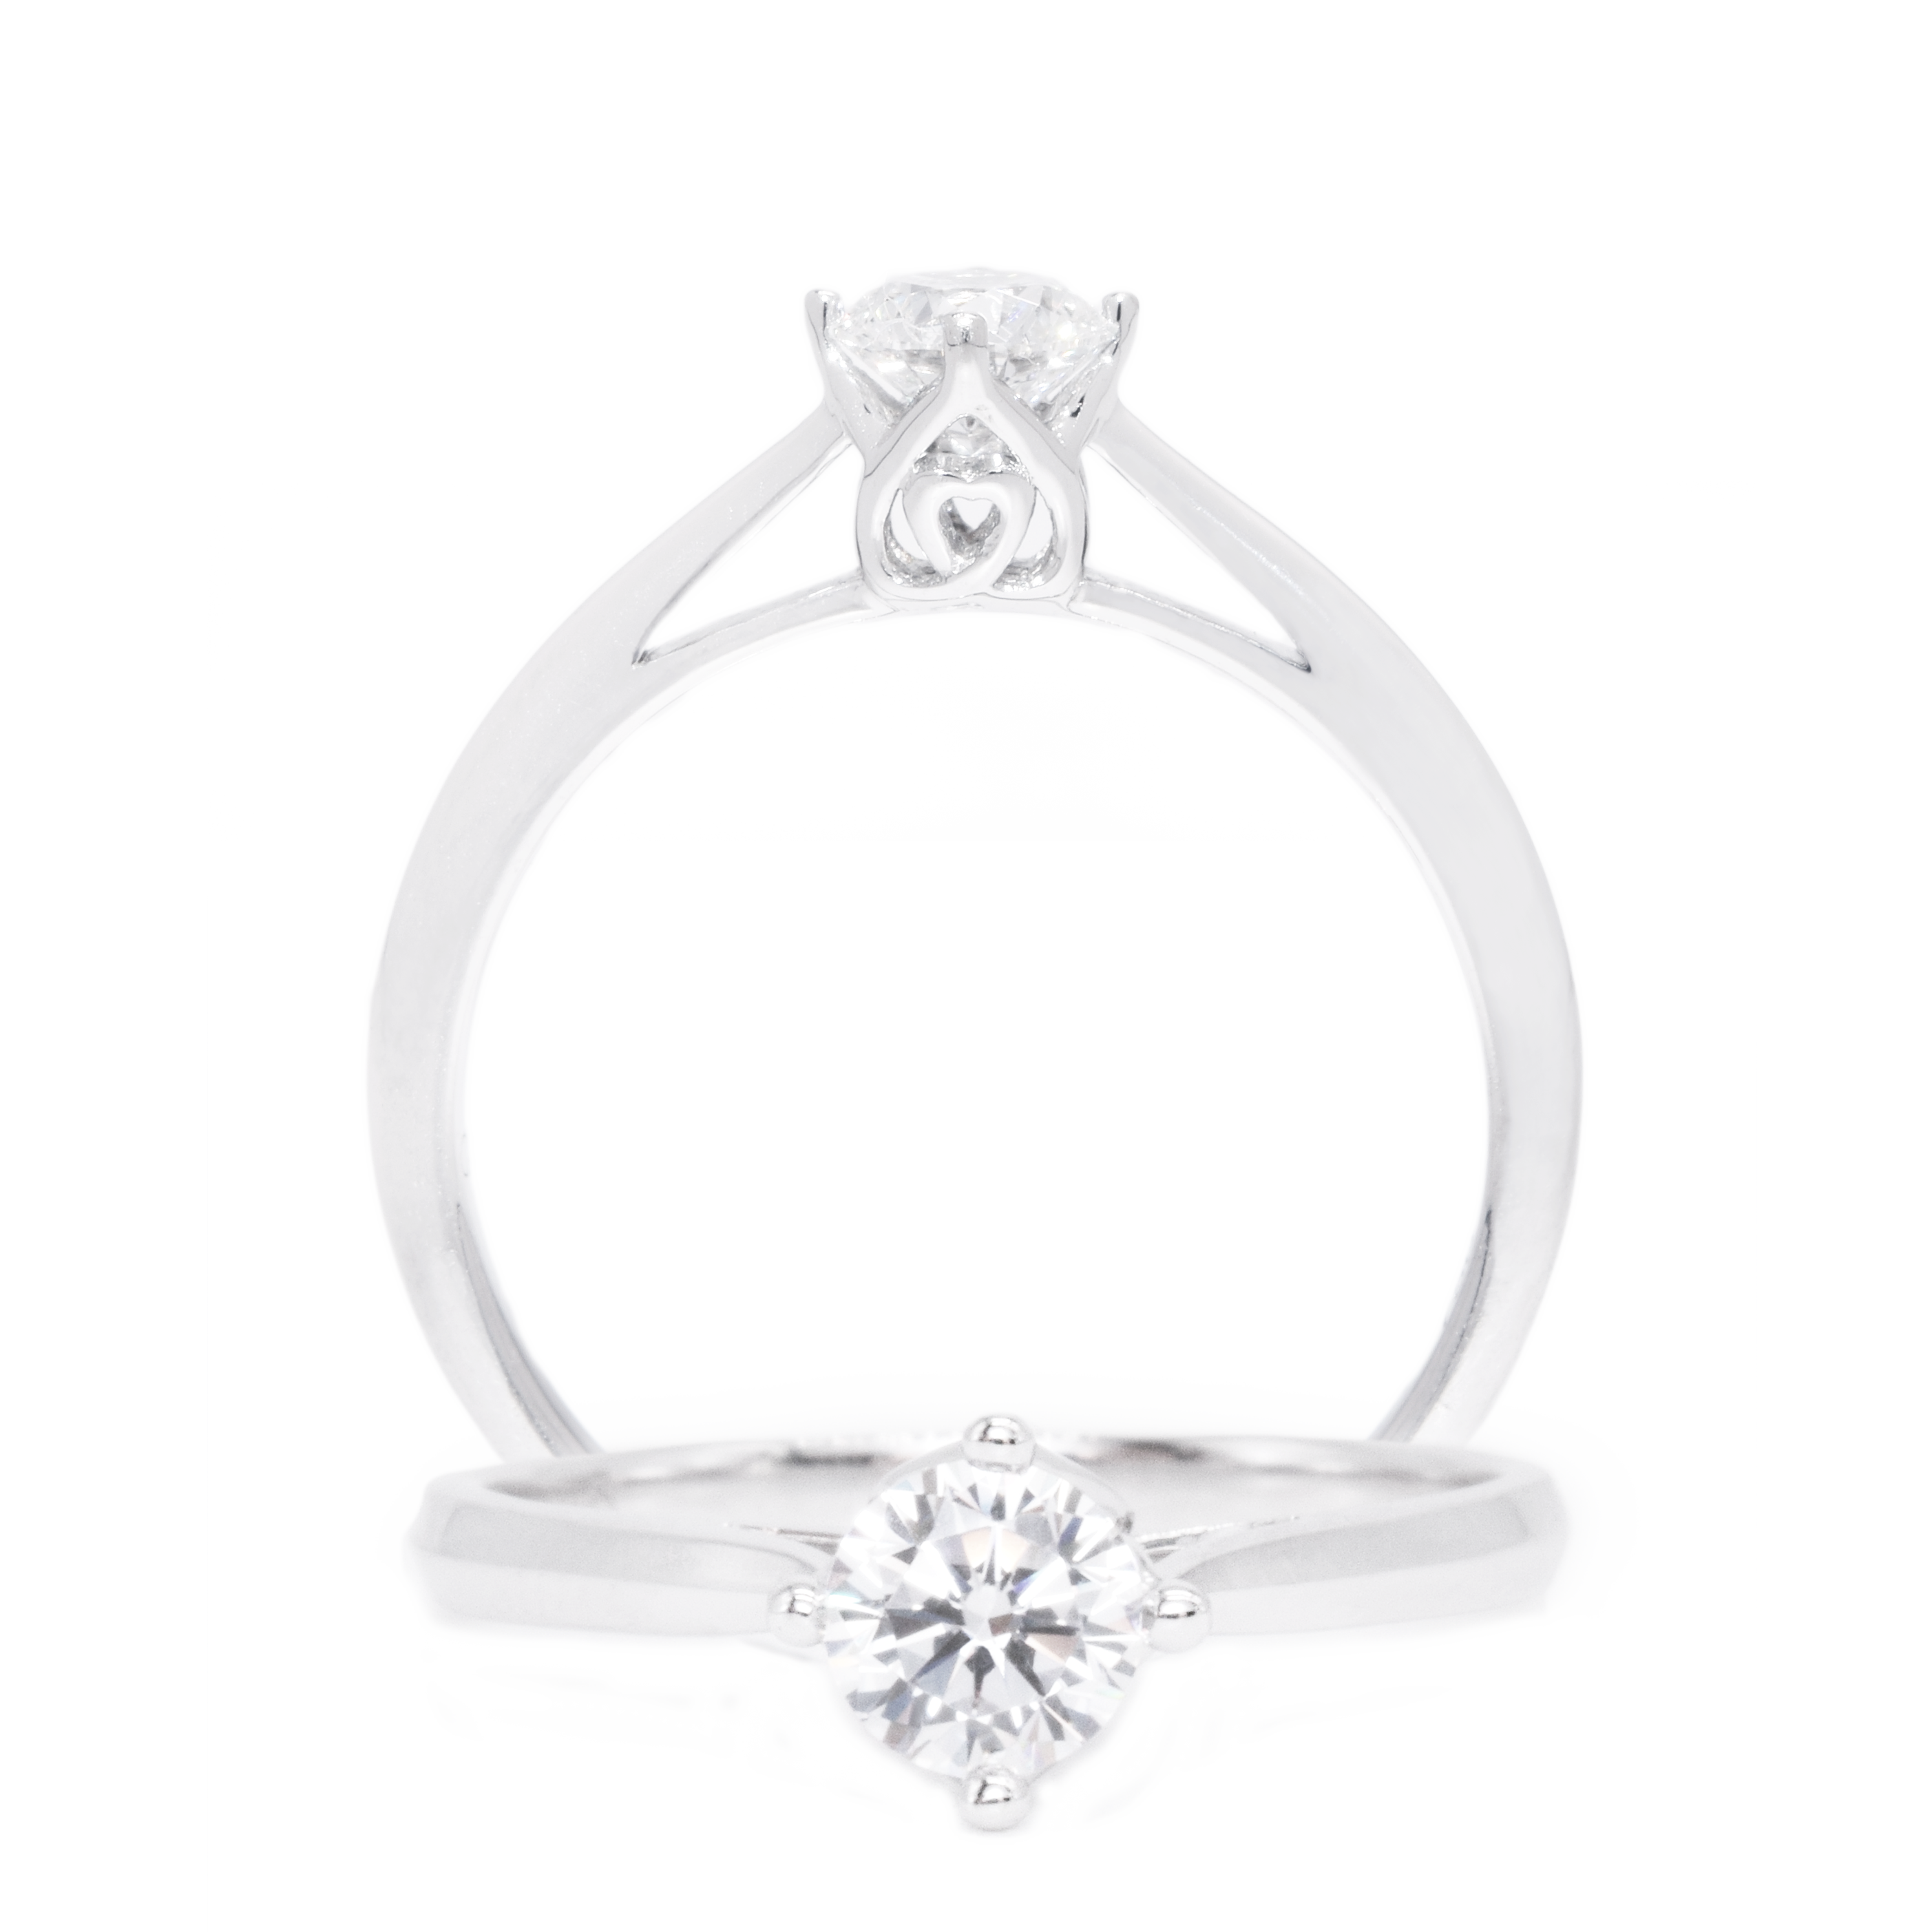 18 carat white-gold Signature beloved solitaire ring setting (setting only)